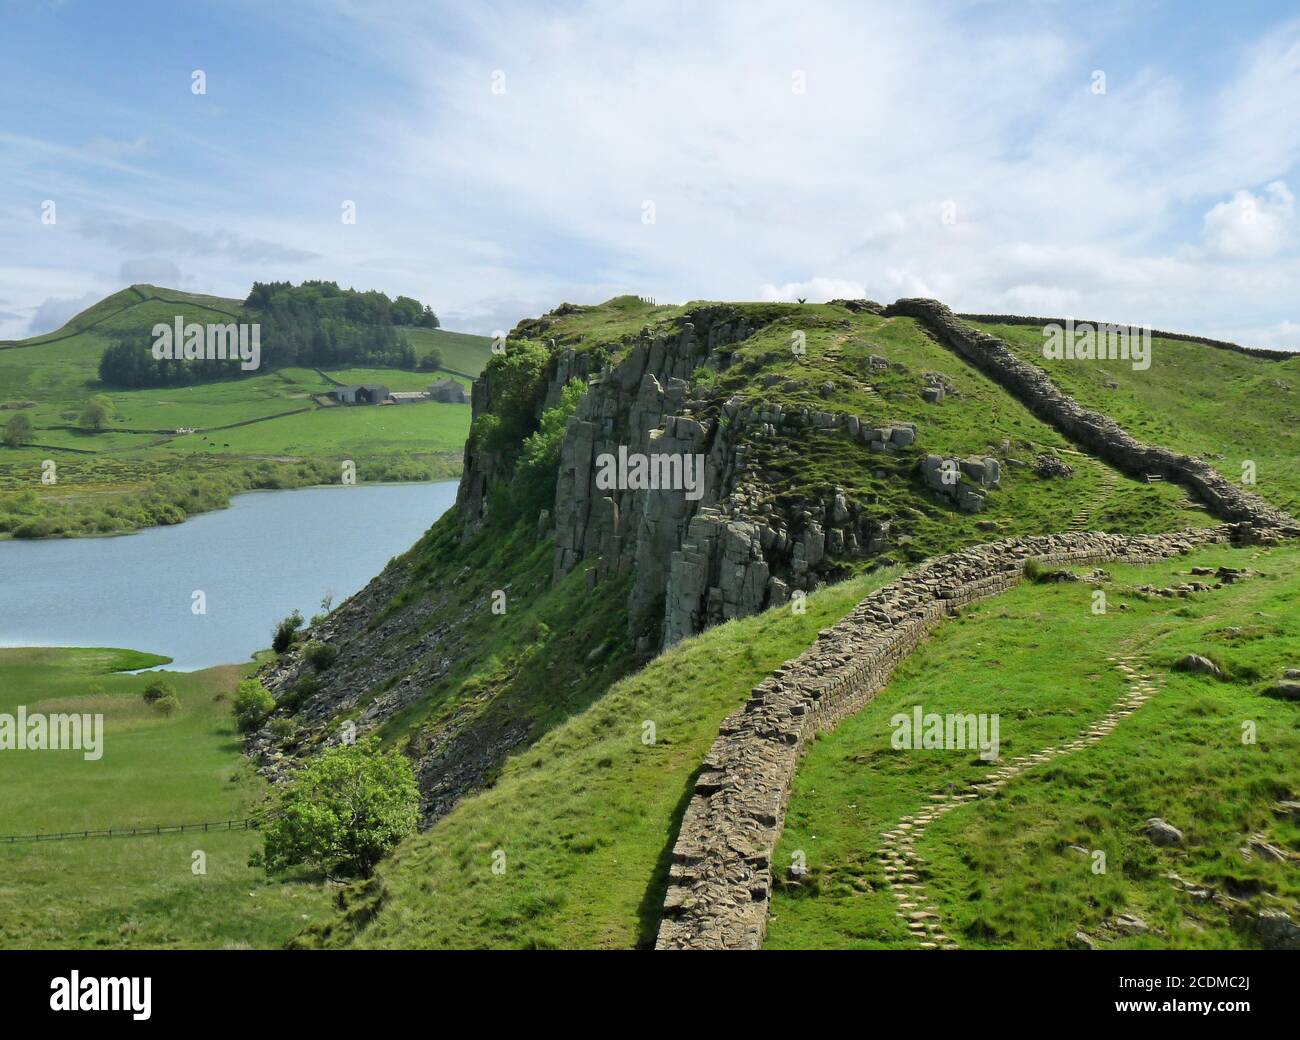 Cirrus clouds in a blue sky advance over Highshield Crags, a dramatic stretch of Hadrian’s Wall in northern England Stock Photo